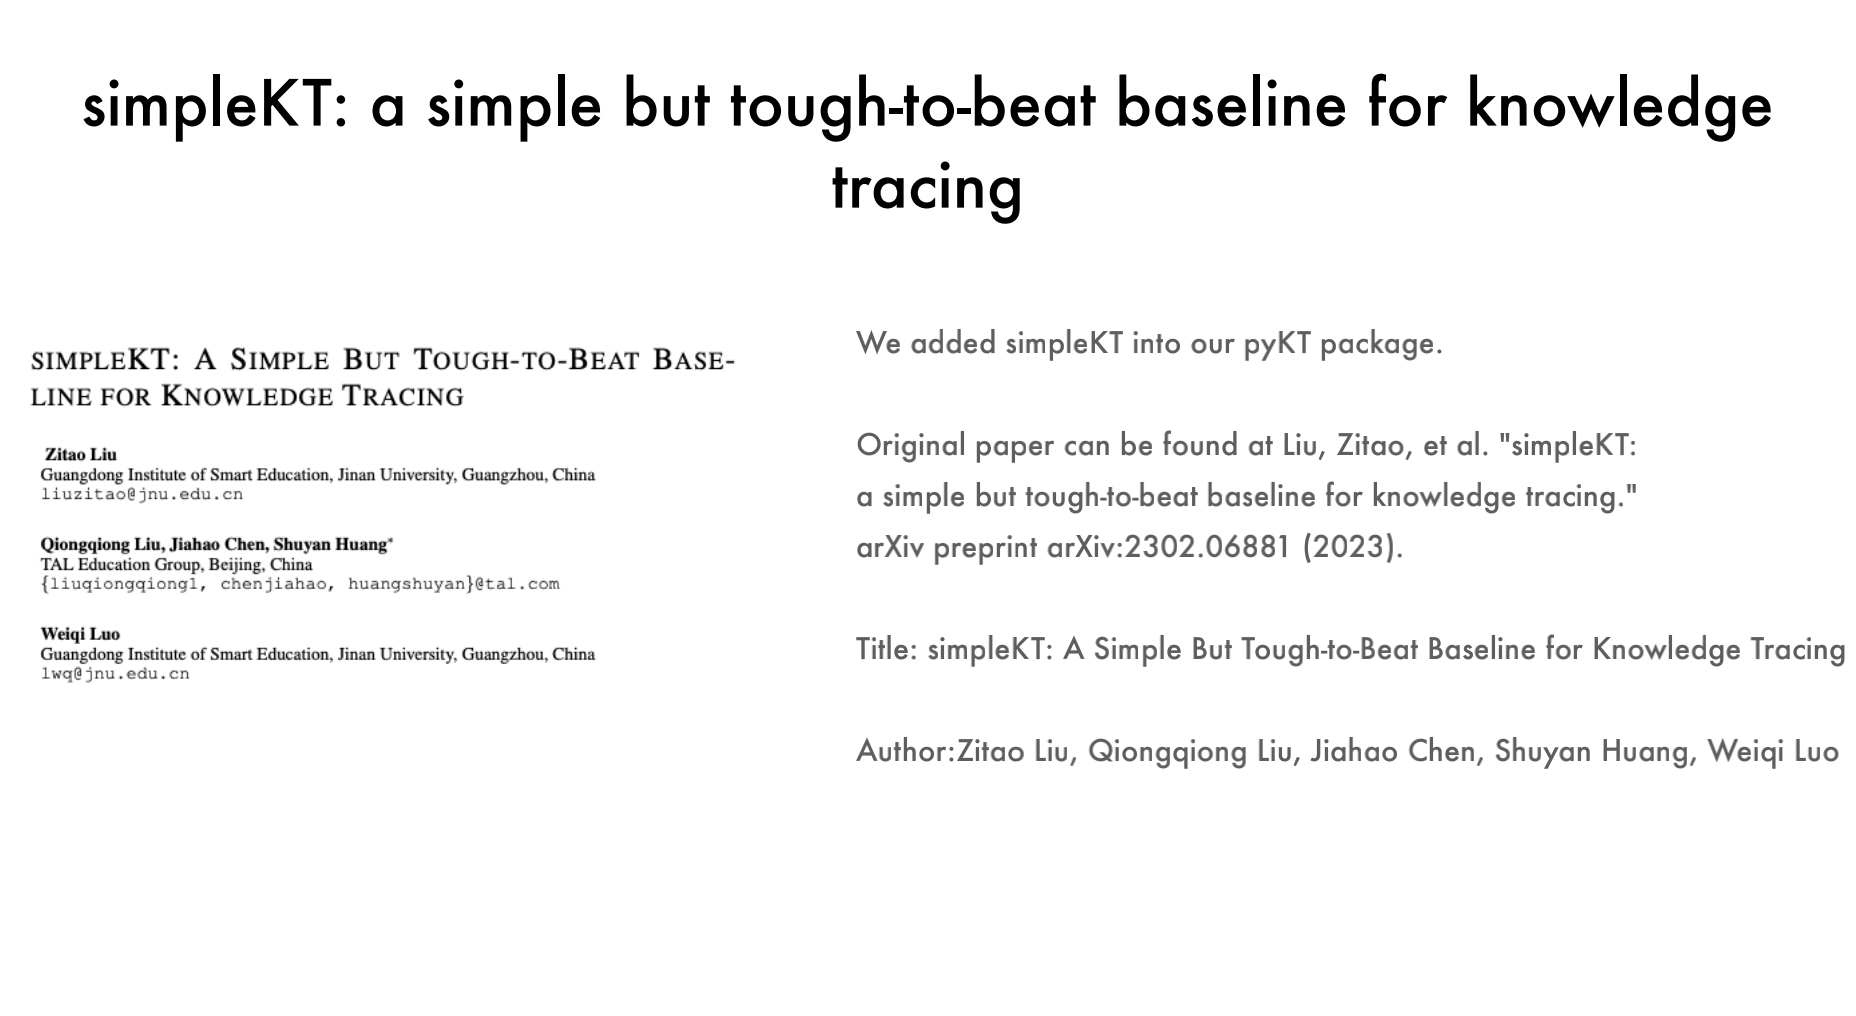 simpleKT: a simple but tough-to-beat baseline for knowledge tracing